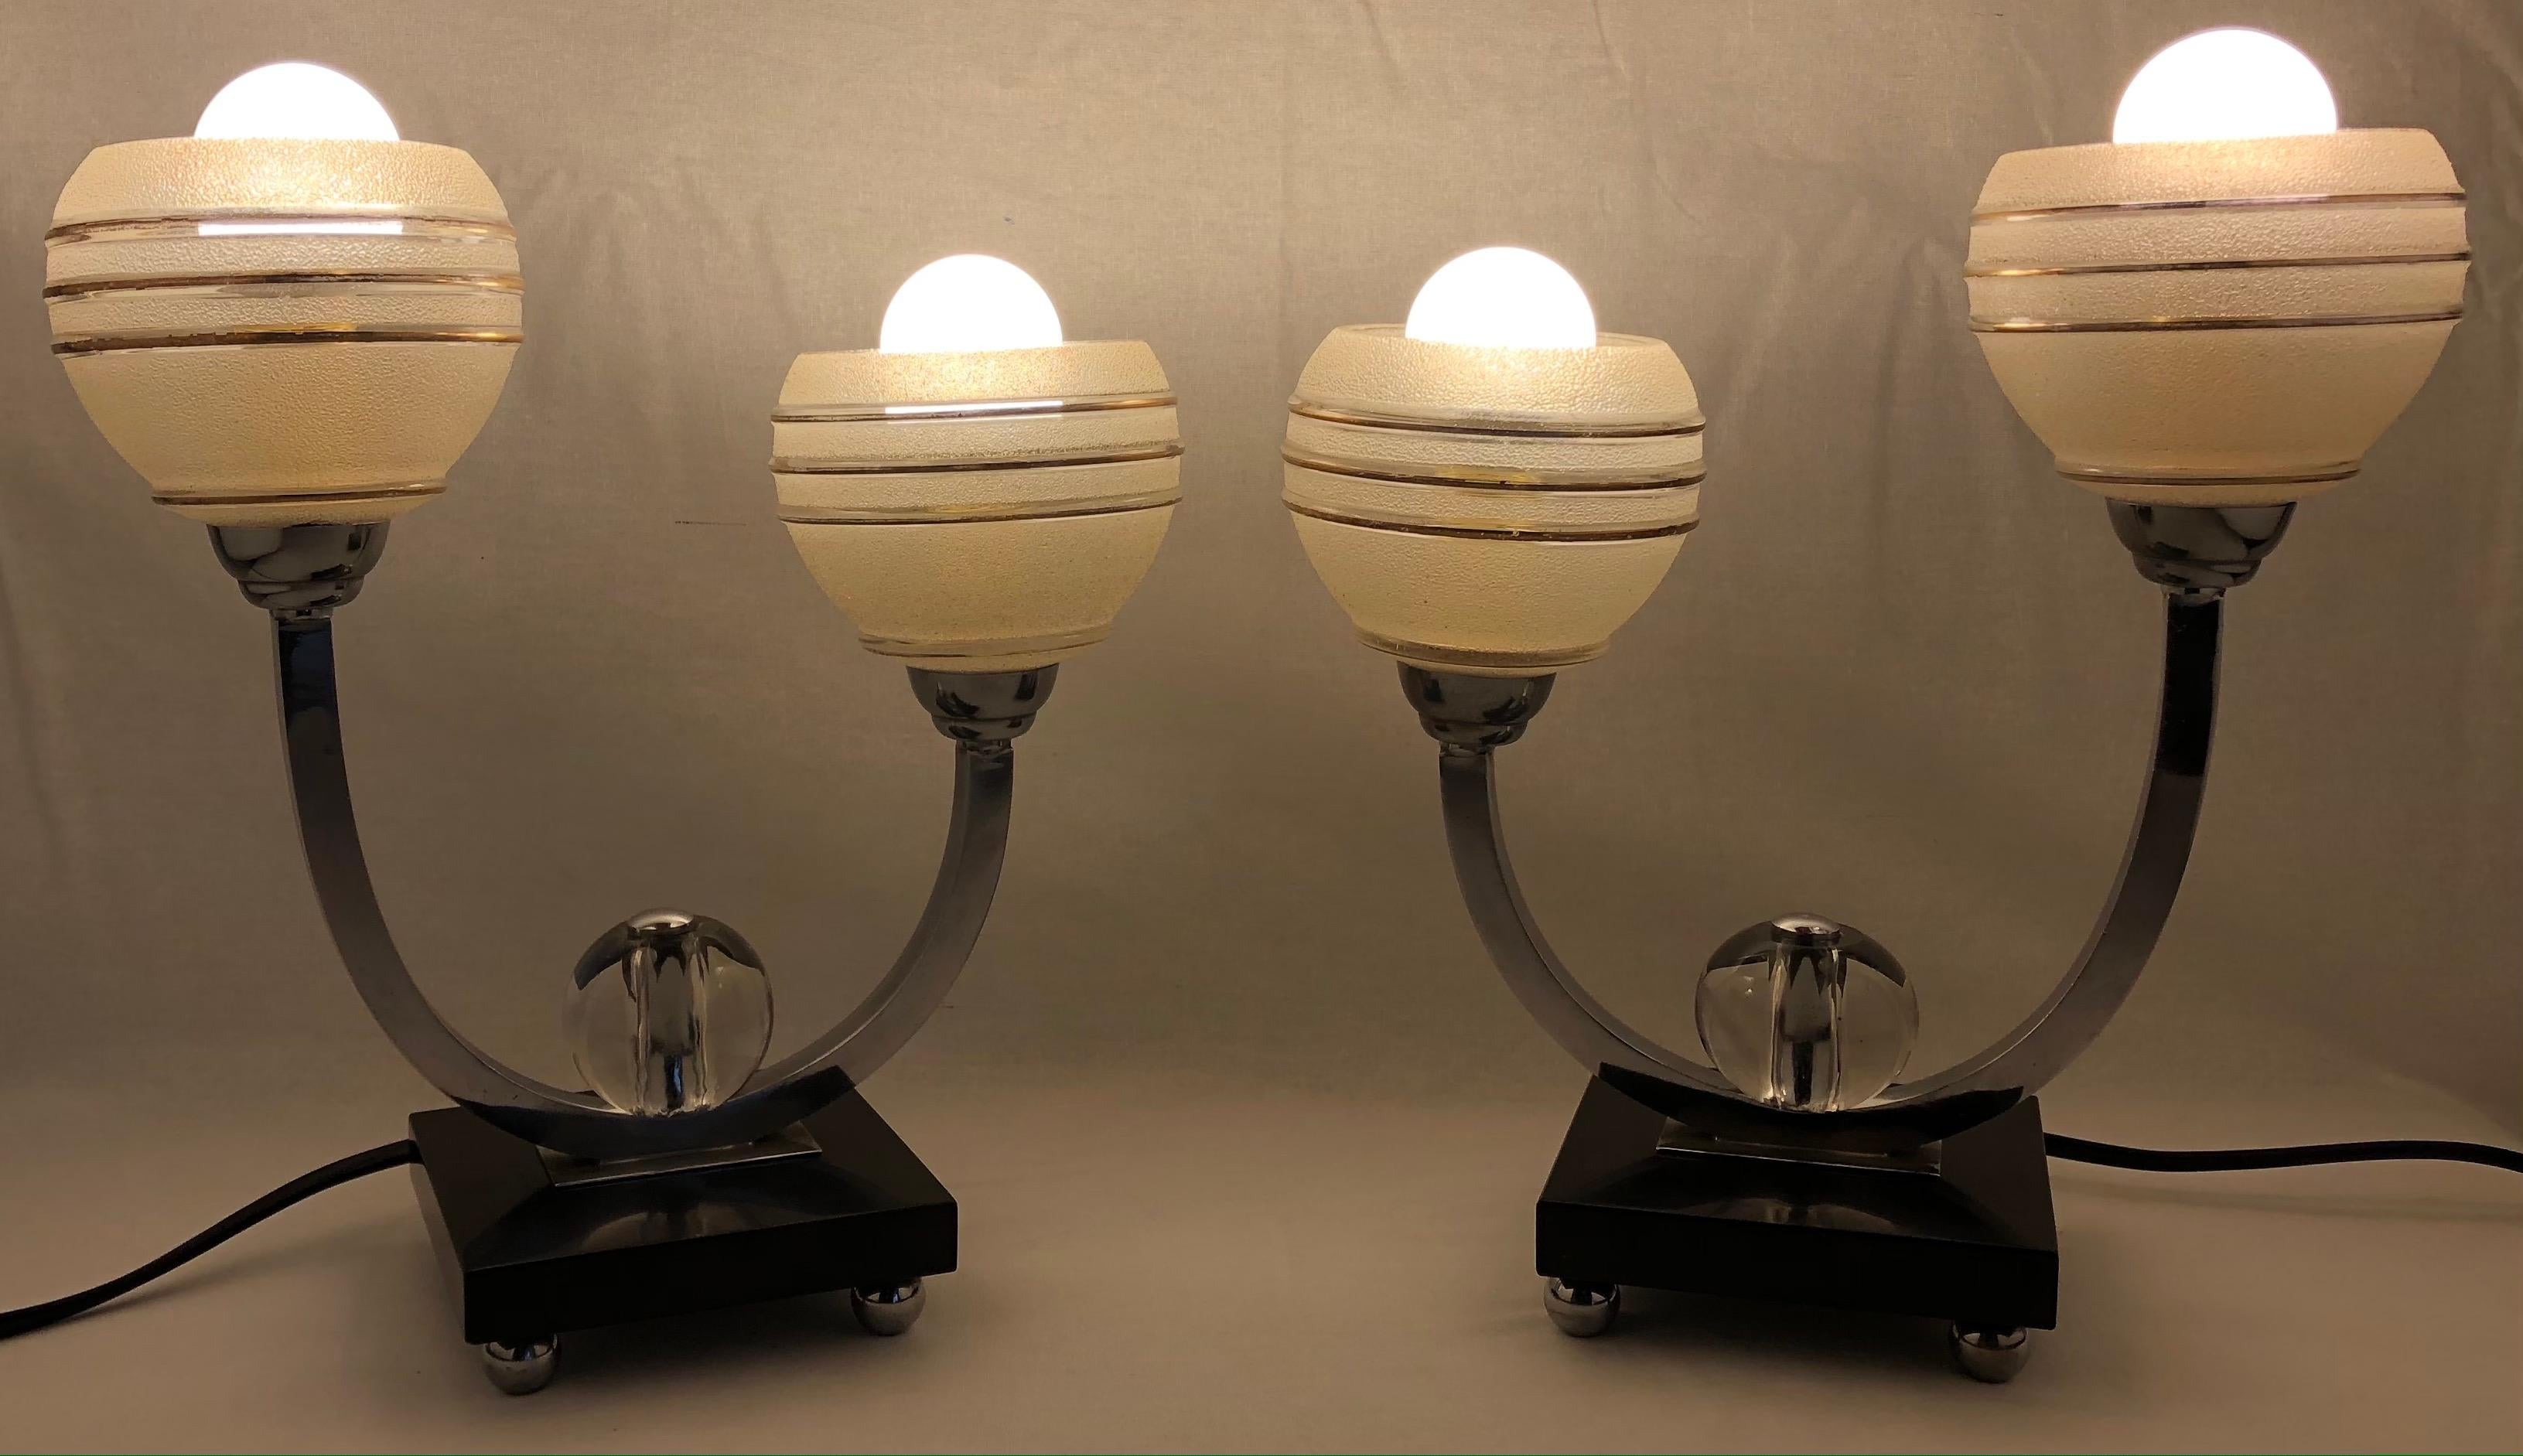 Very decorative pair of French art deco table lamps. These beautiful lamps are very good quality and are in perfect condition.

The striking frosted glass shades with gold trim are very pleasing to the eye, as are the black marble bases.